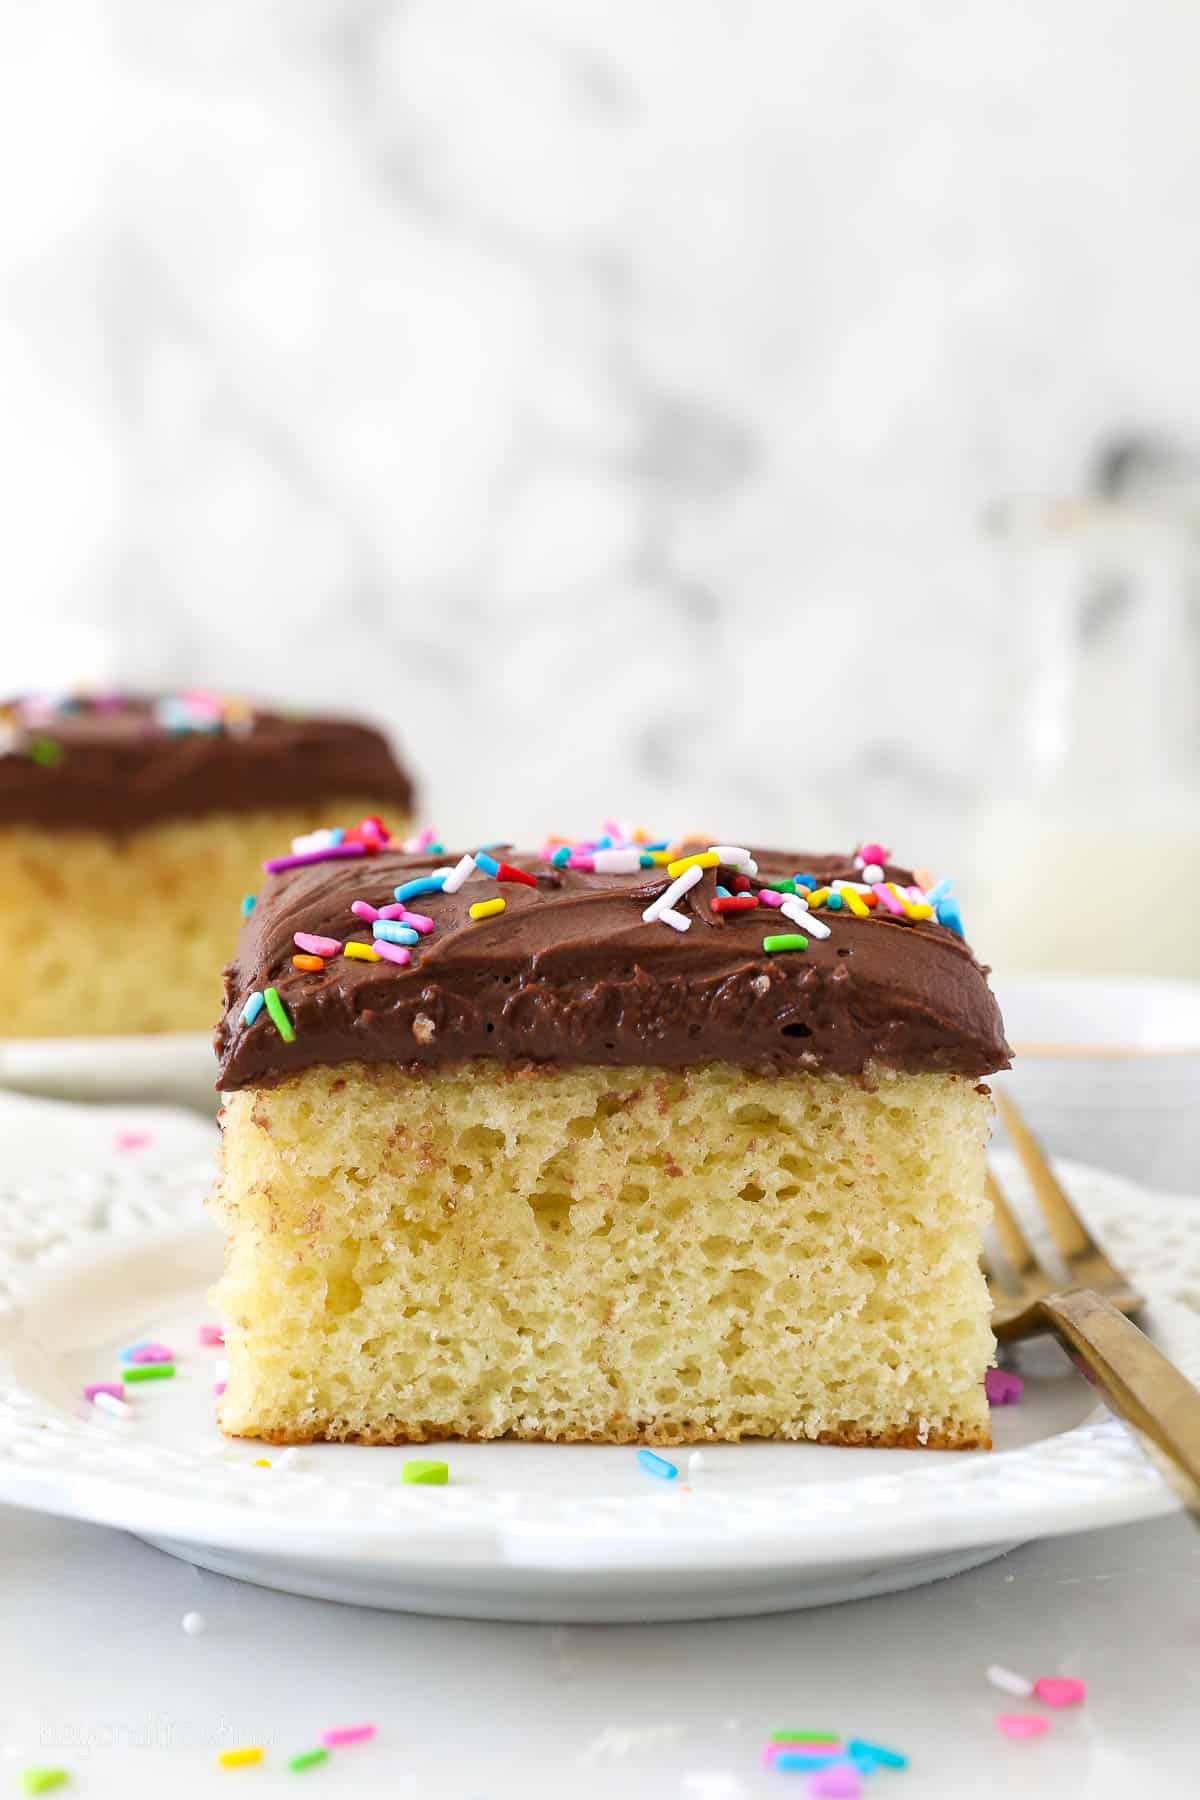 A slice of yellow cake with chocolate frosting and sprinkles on a white plate.